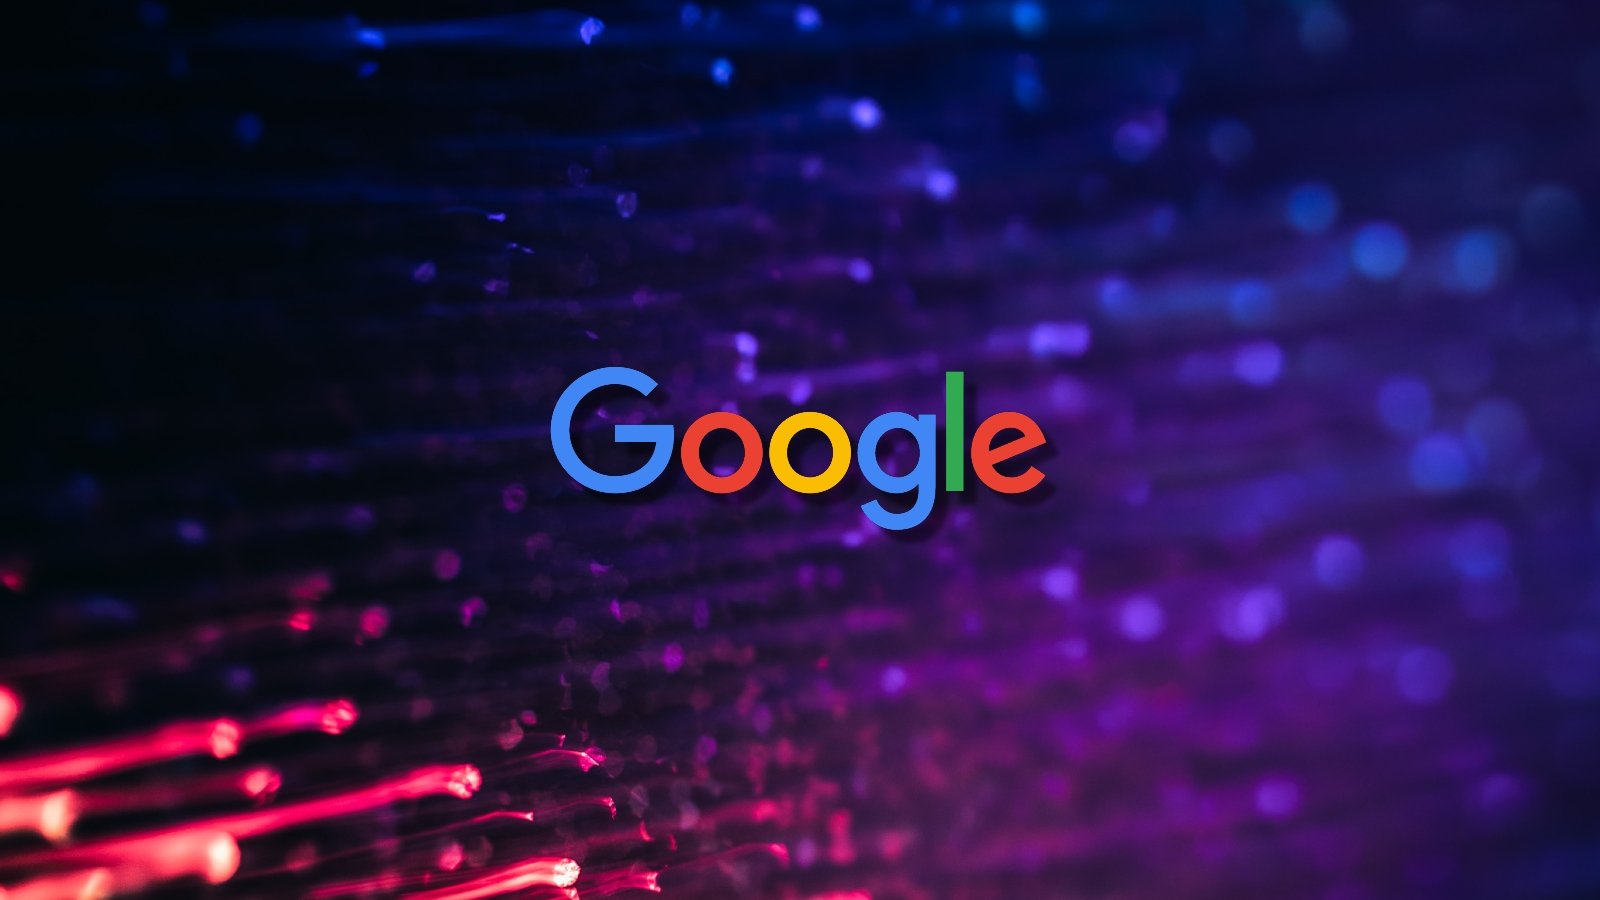 Google assigns new maximum rated CVE to libwebp bug exploited in attacks – Source: www.bleepingcomputer.com